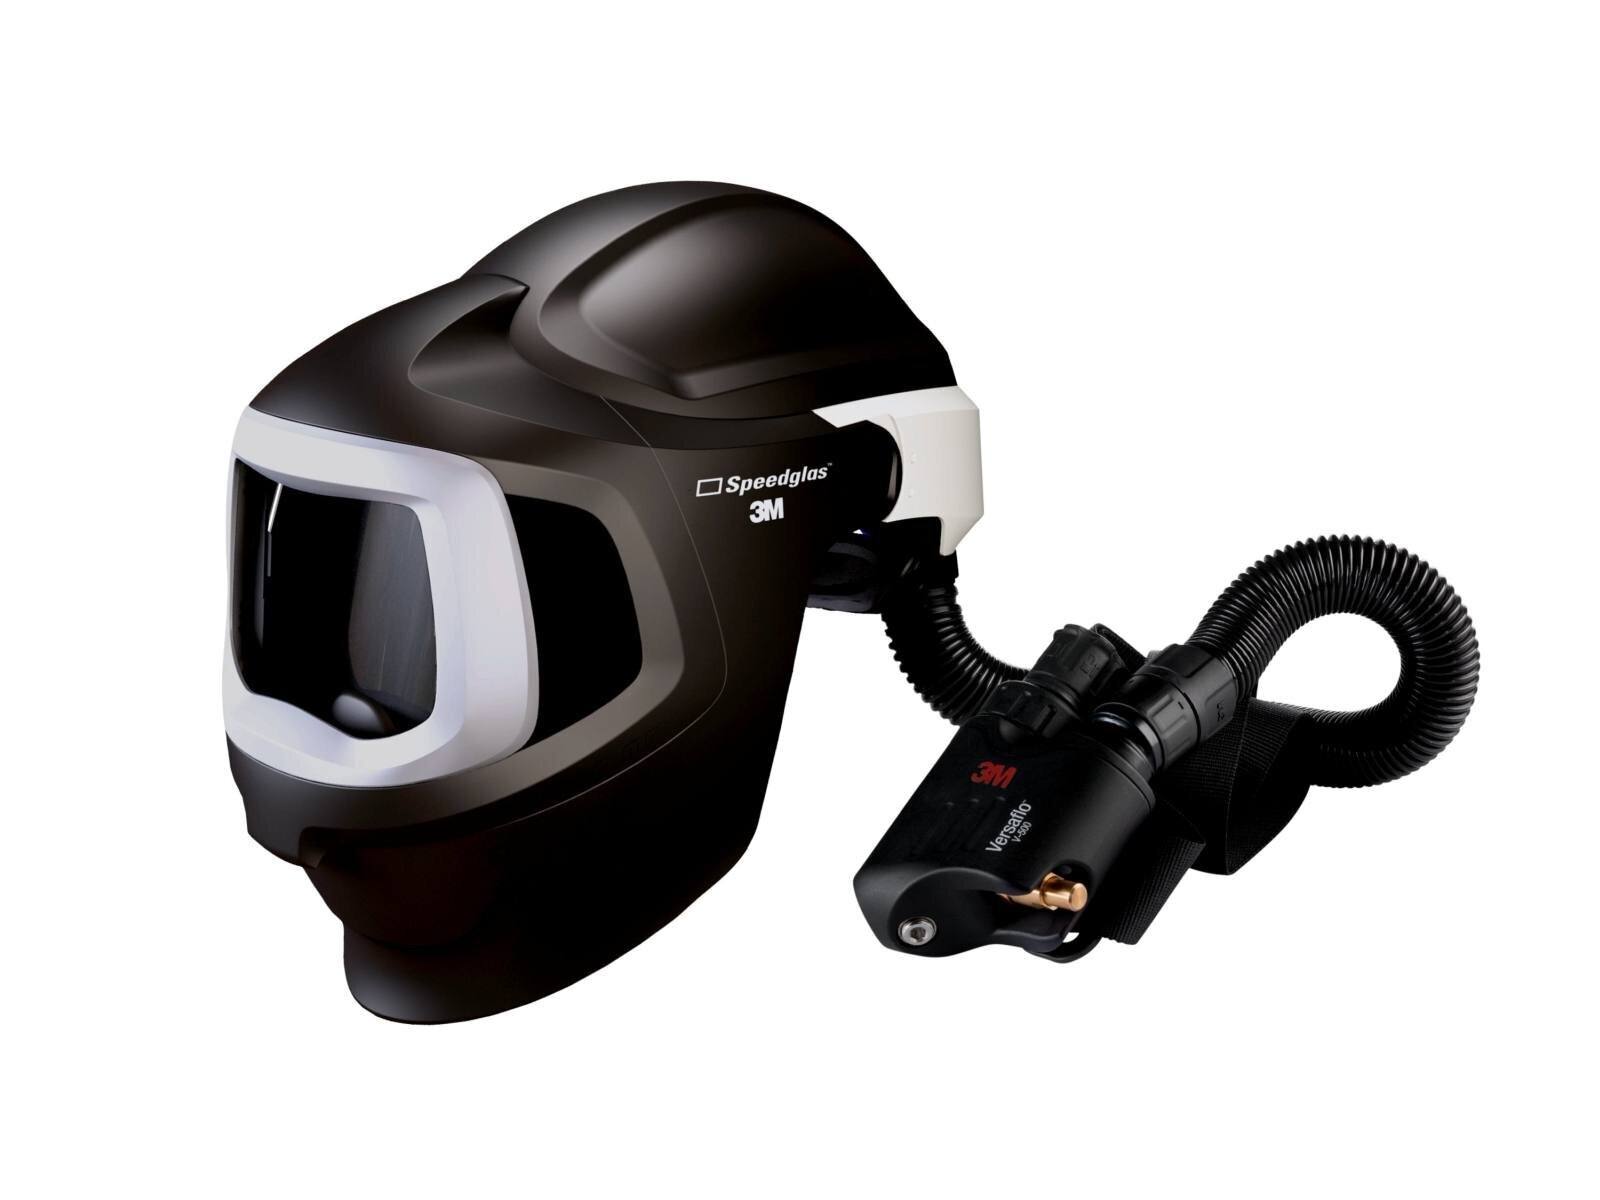 3M Speedglas 9100 MP welding mask, without ADF, with Versaflo V-500E compressed air breathing protection, QRS air hose, 5333506 adapter, air flow meter, pre-filter, spark arrester, particle filter, lithium-ion battery and charger incl. storage bag #5